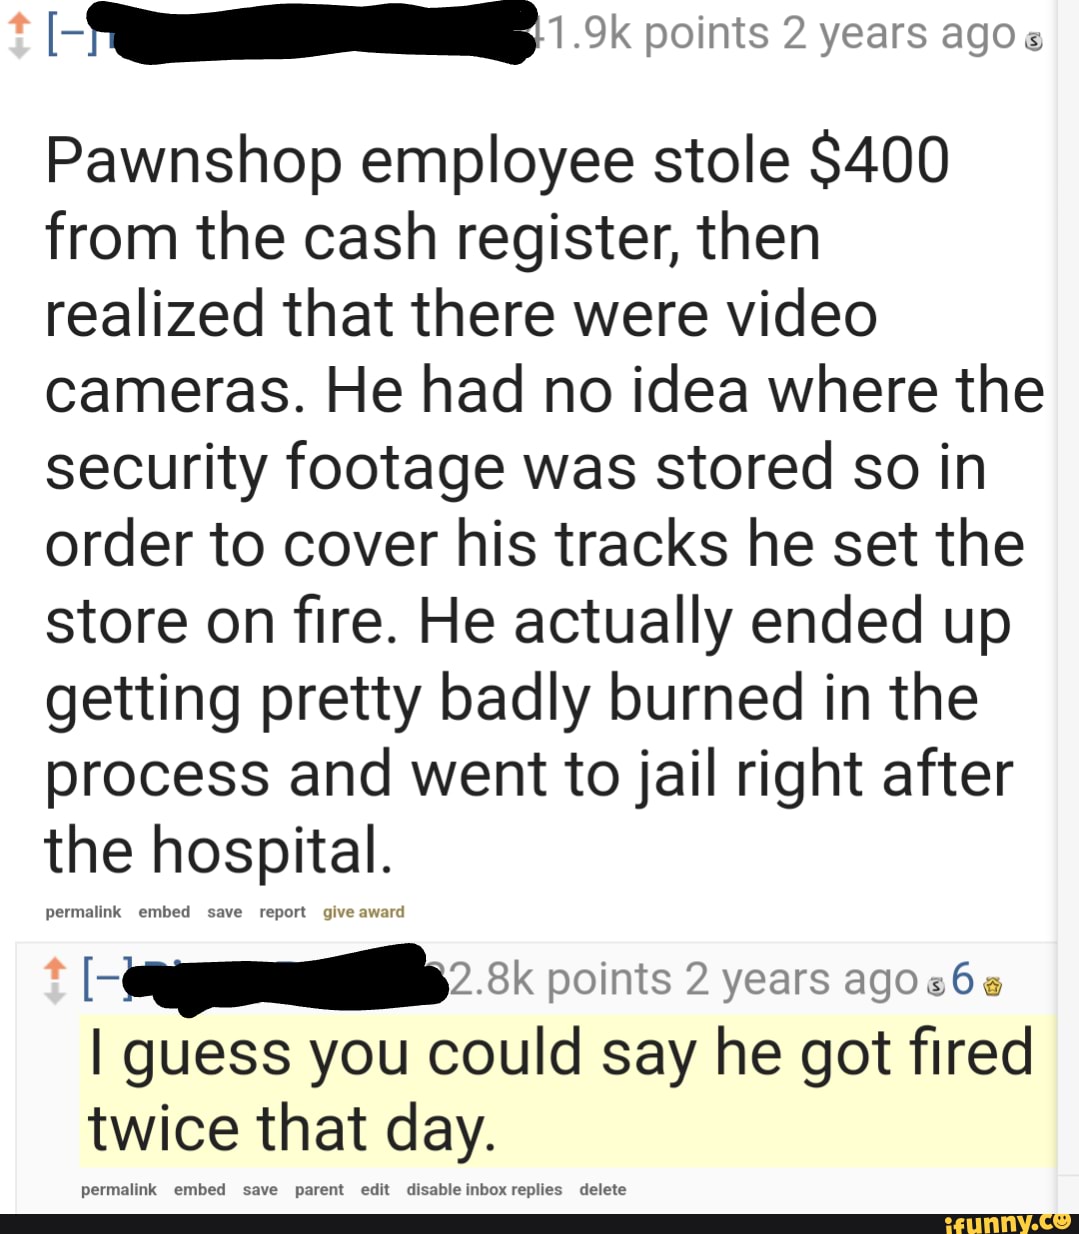 Points 2 Years Ago Pawnshop Employee Stole 400 From The Cash Register Then Realized That There